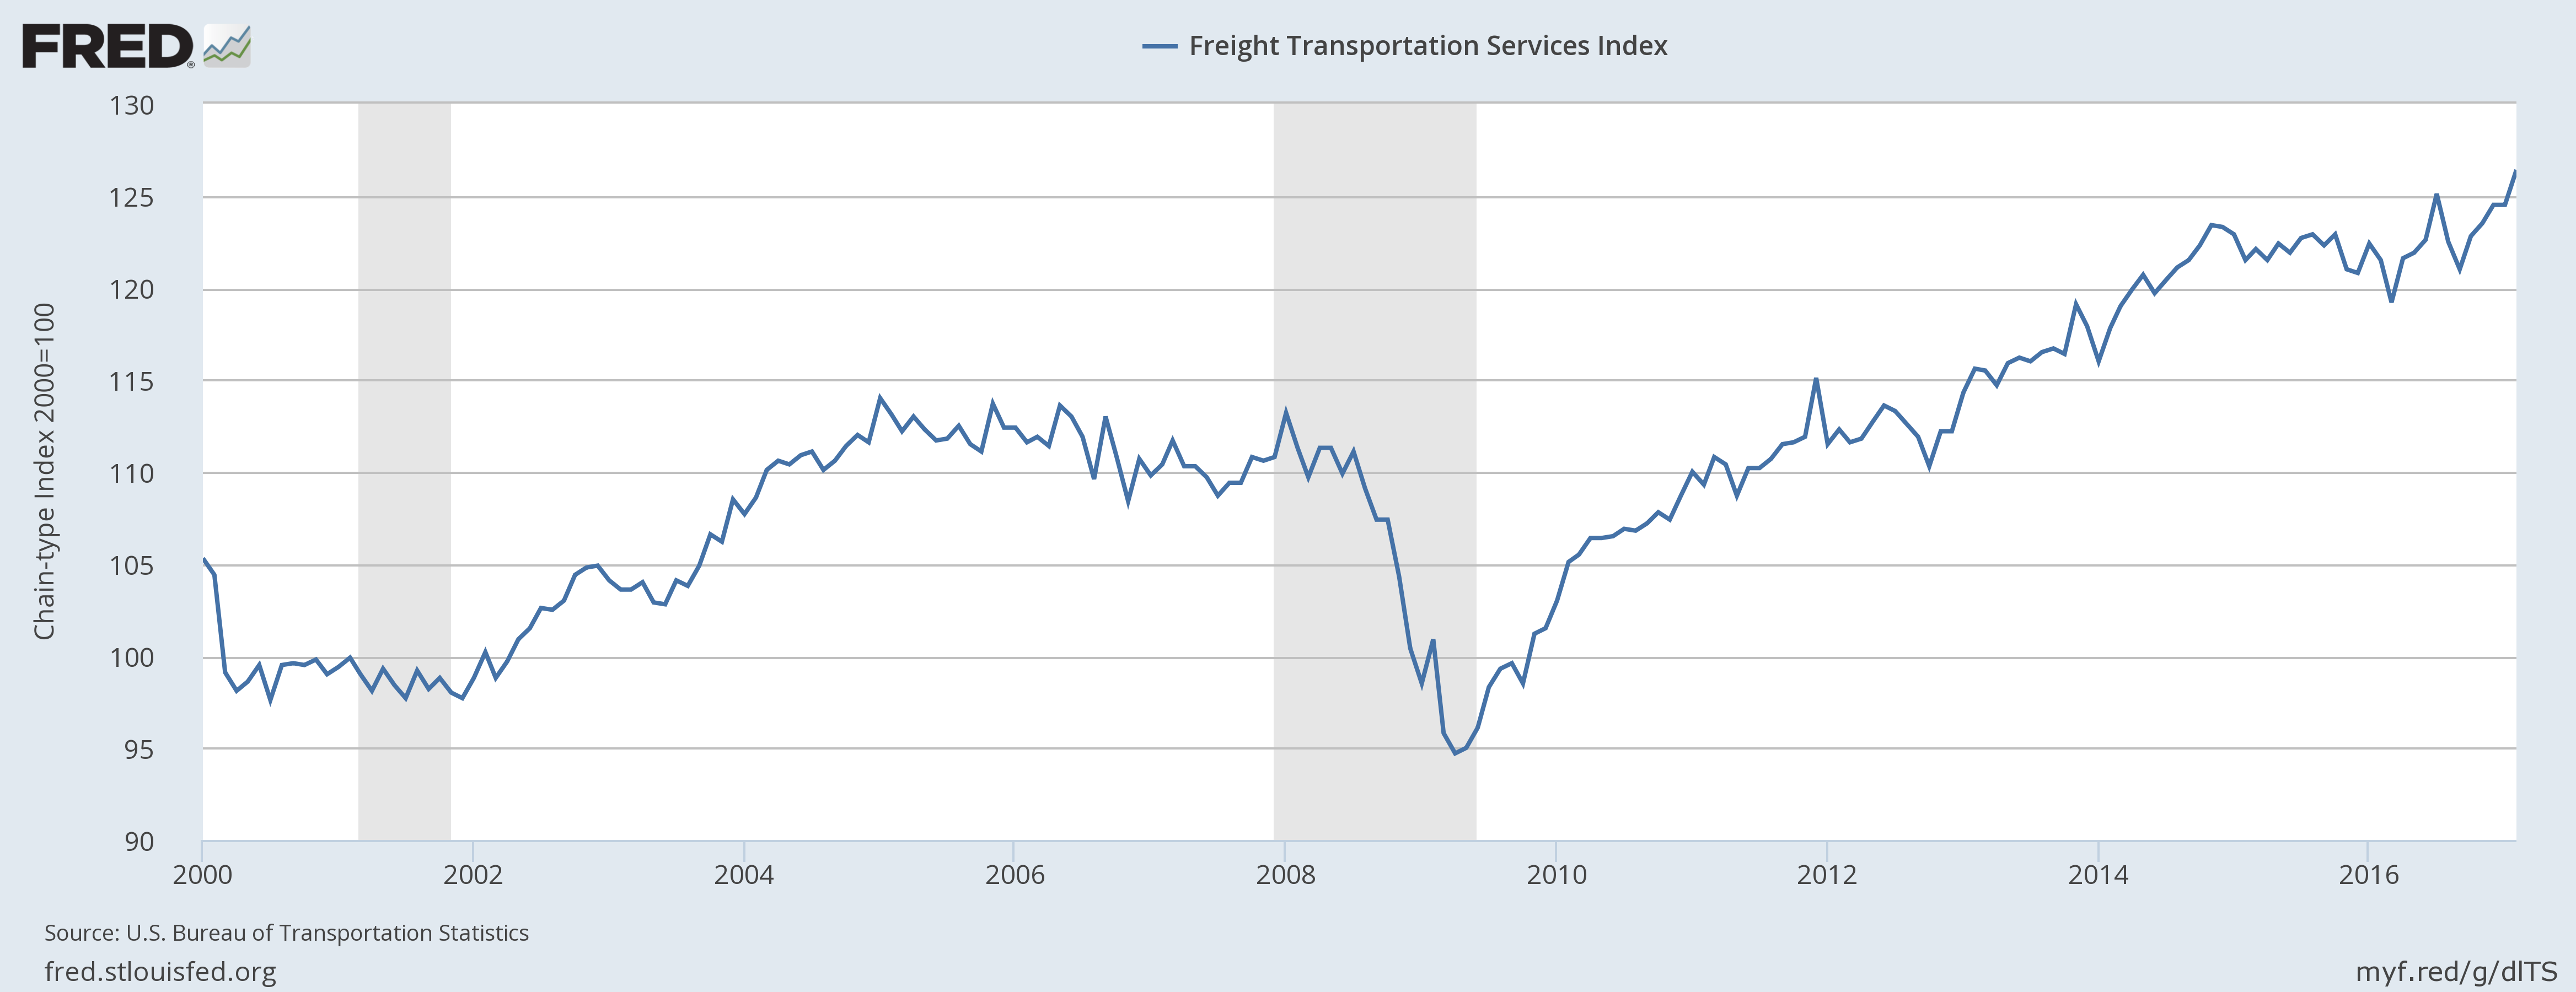 Freight Transportation Services Index